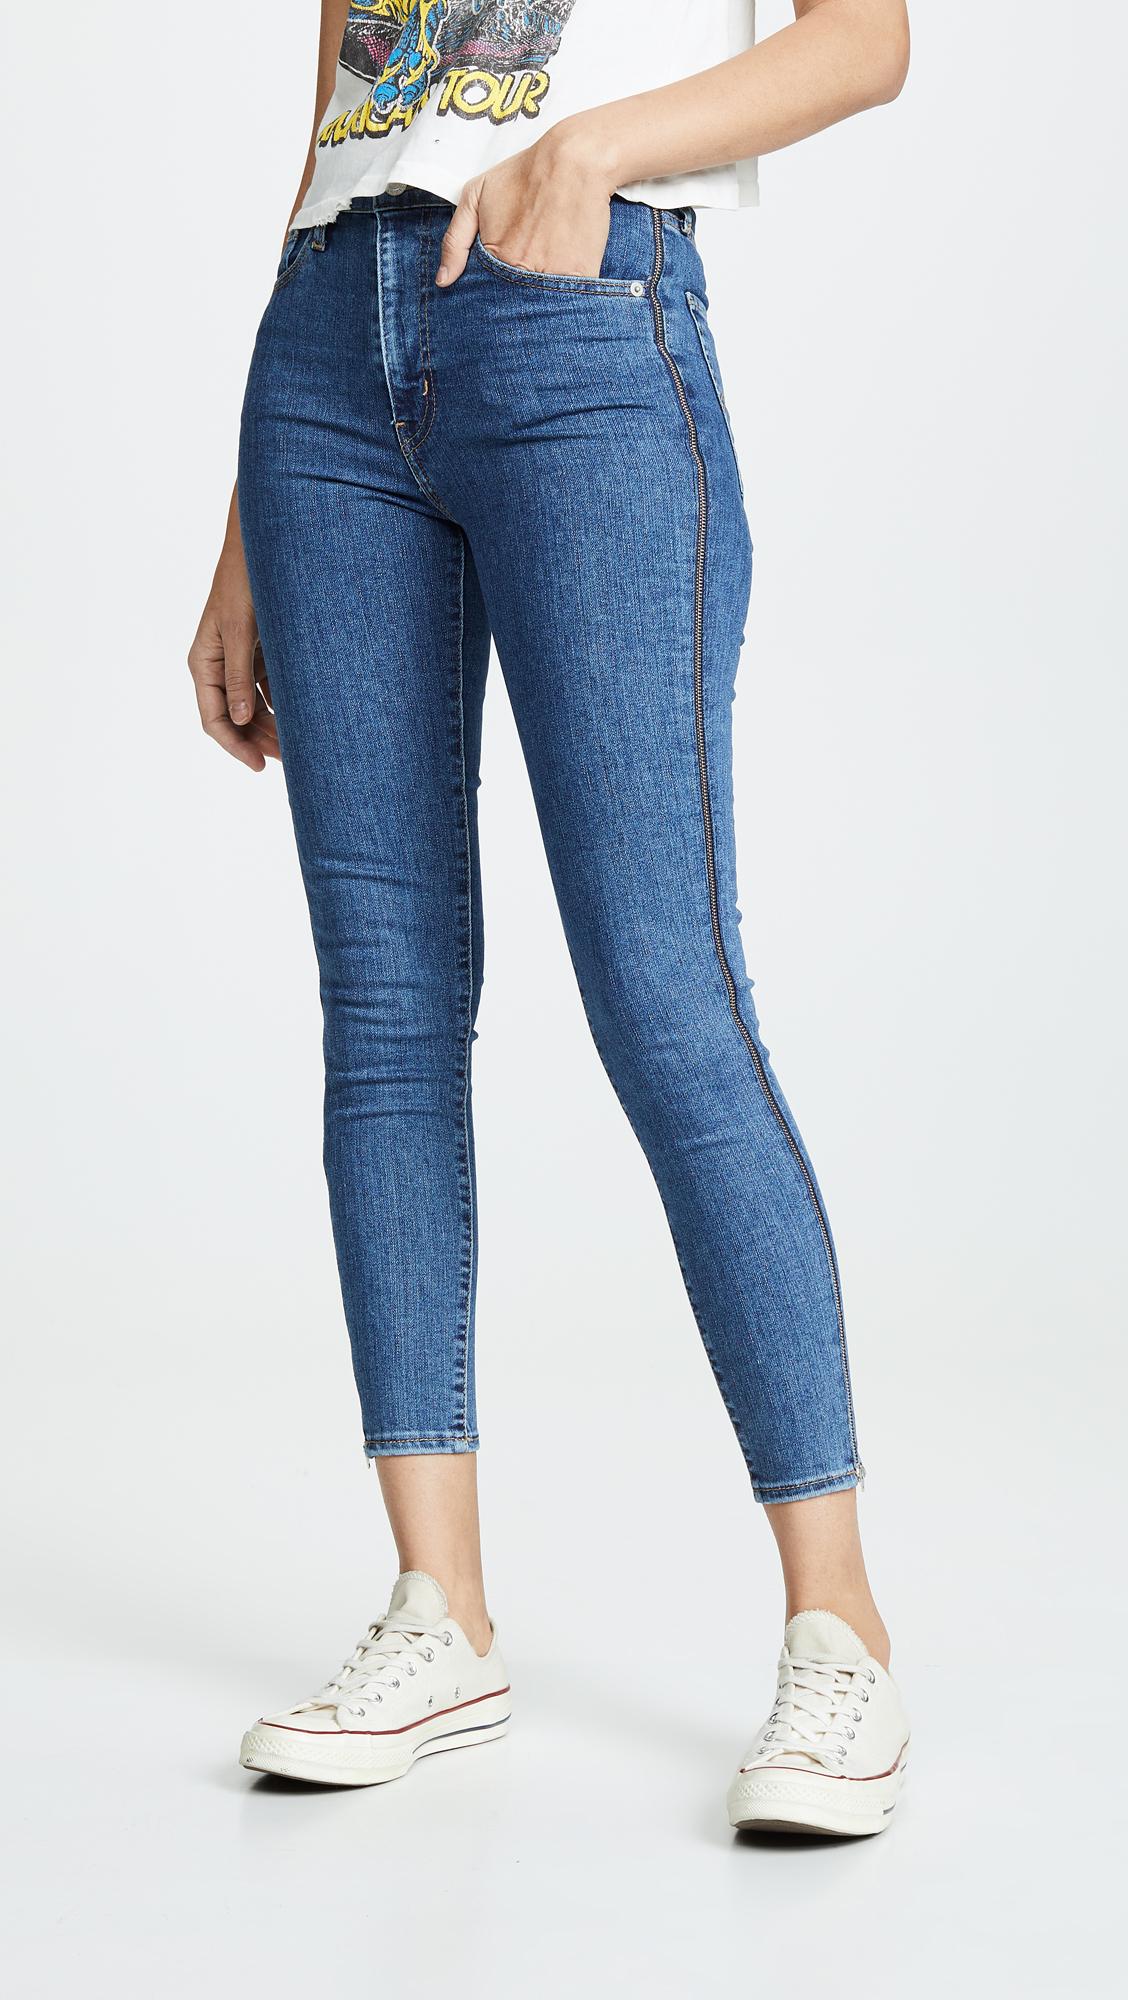 Levi's Mile High Ankle Zip Jeans in Blue | Lyst